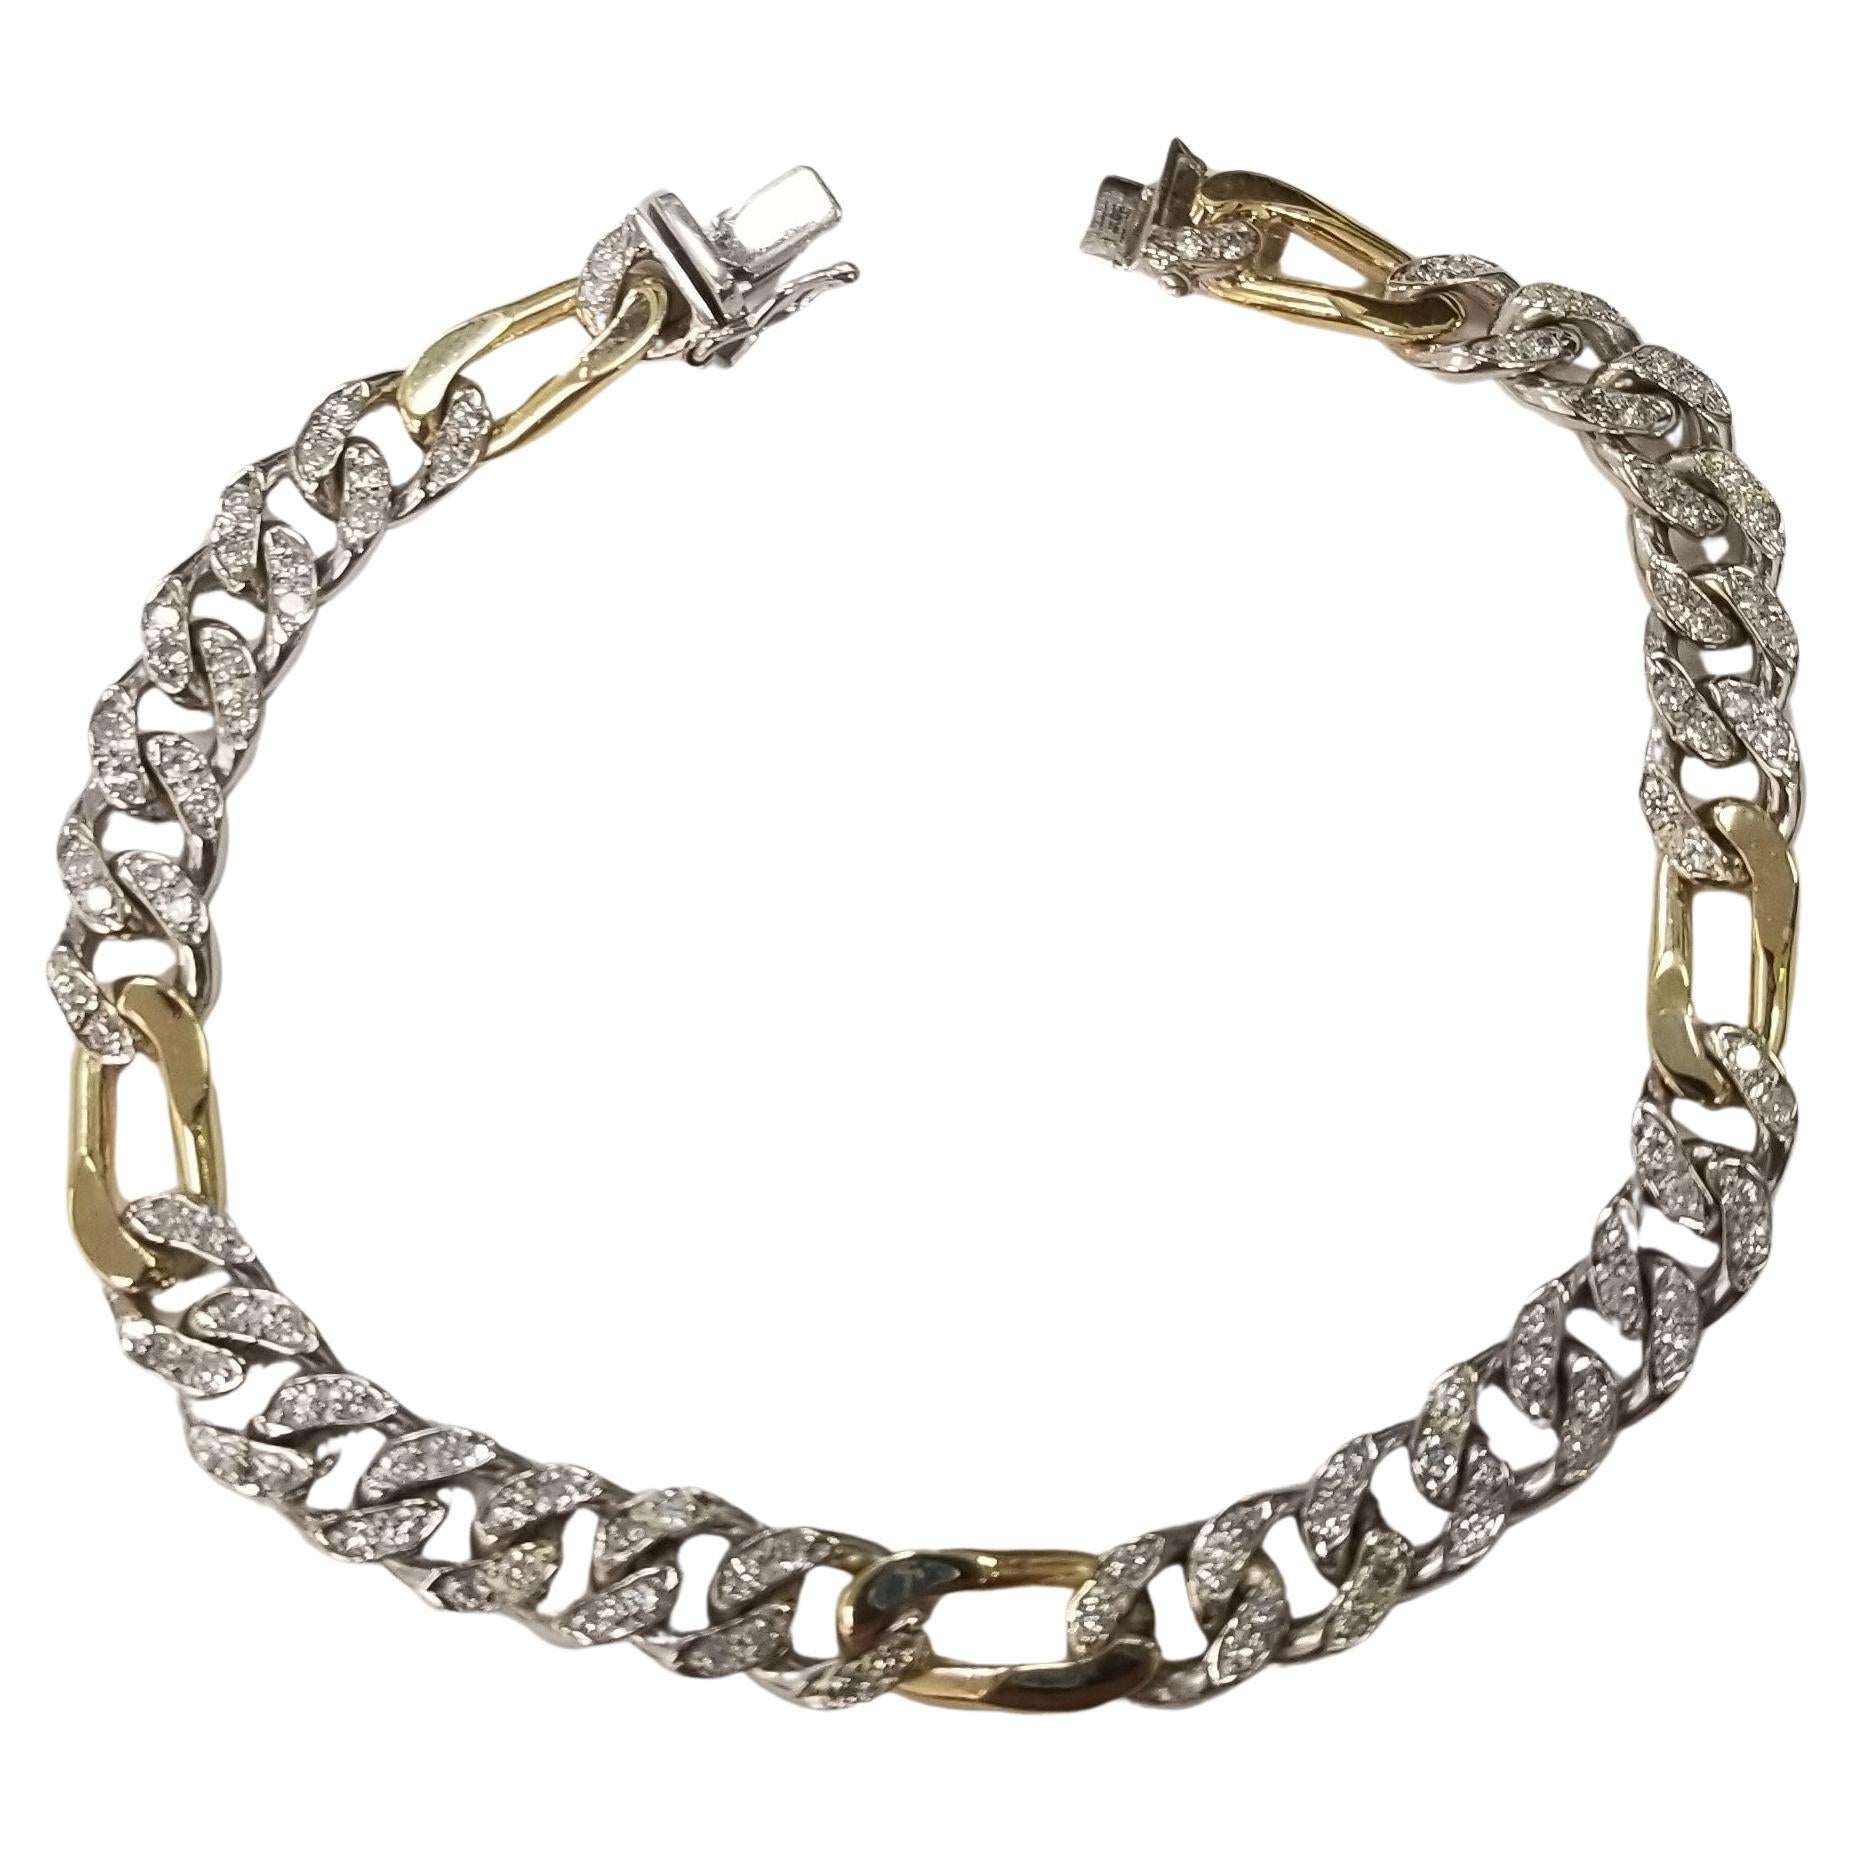 18K White & Yellow Gold Link Style Pave' Diamond Bracelet weighing 1.10cts. For Sale